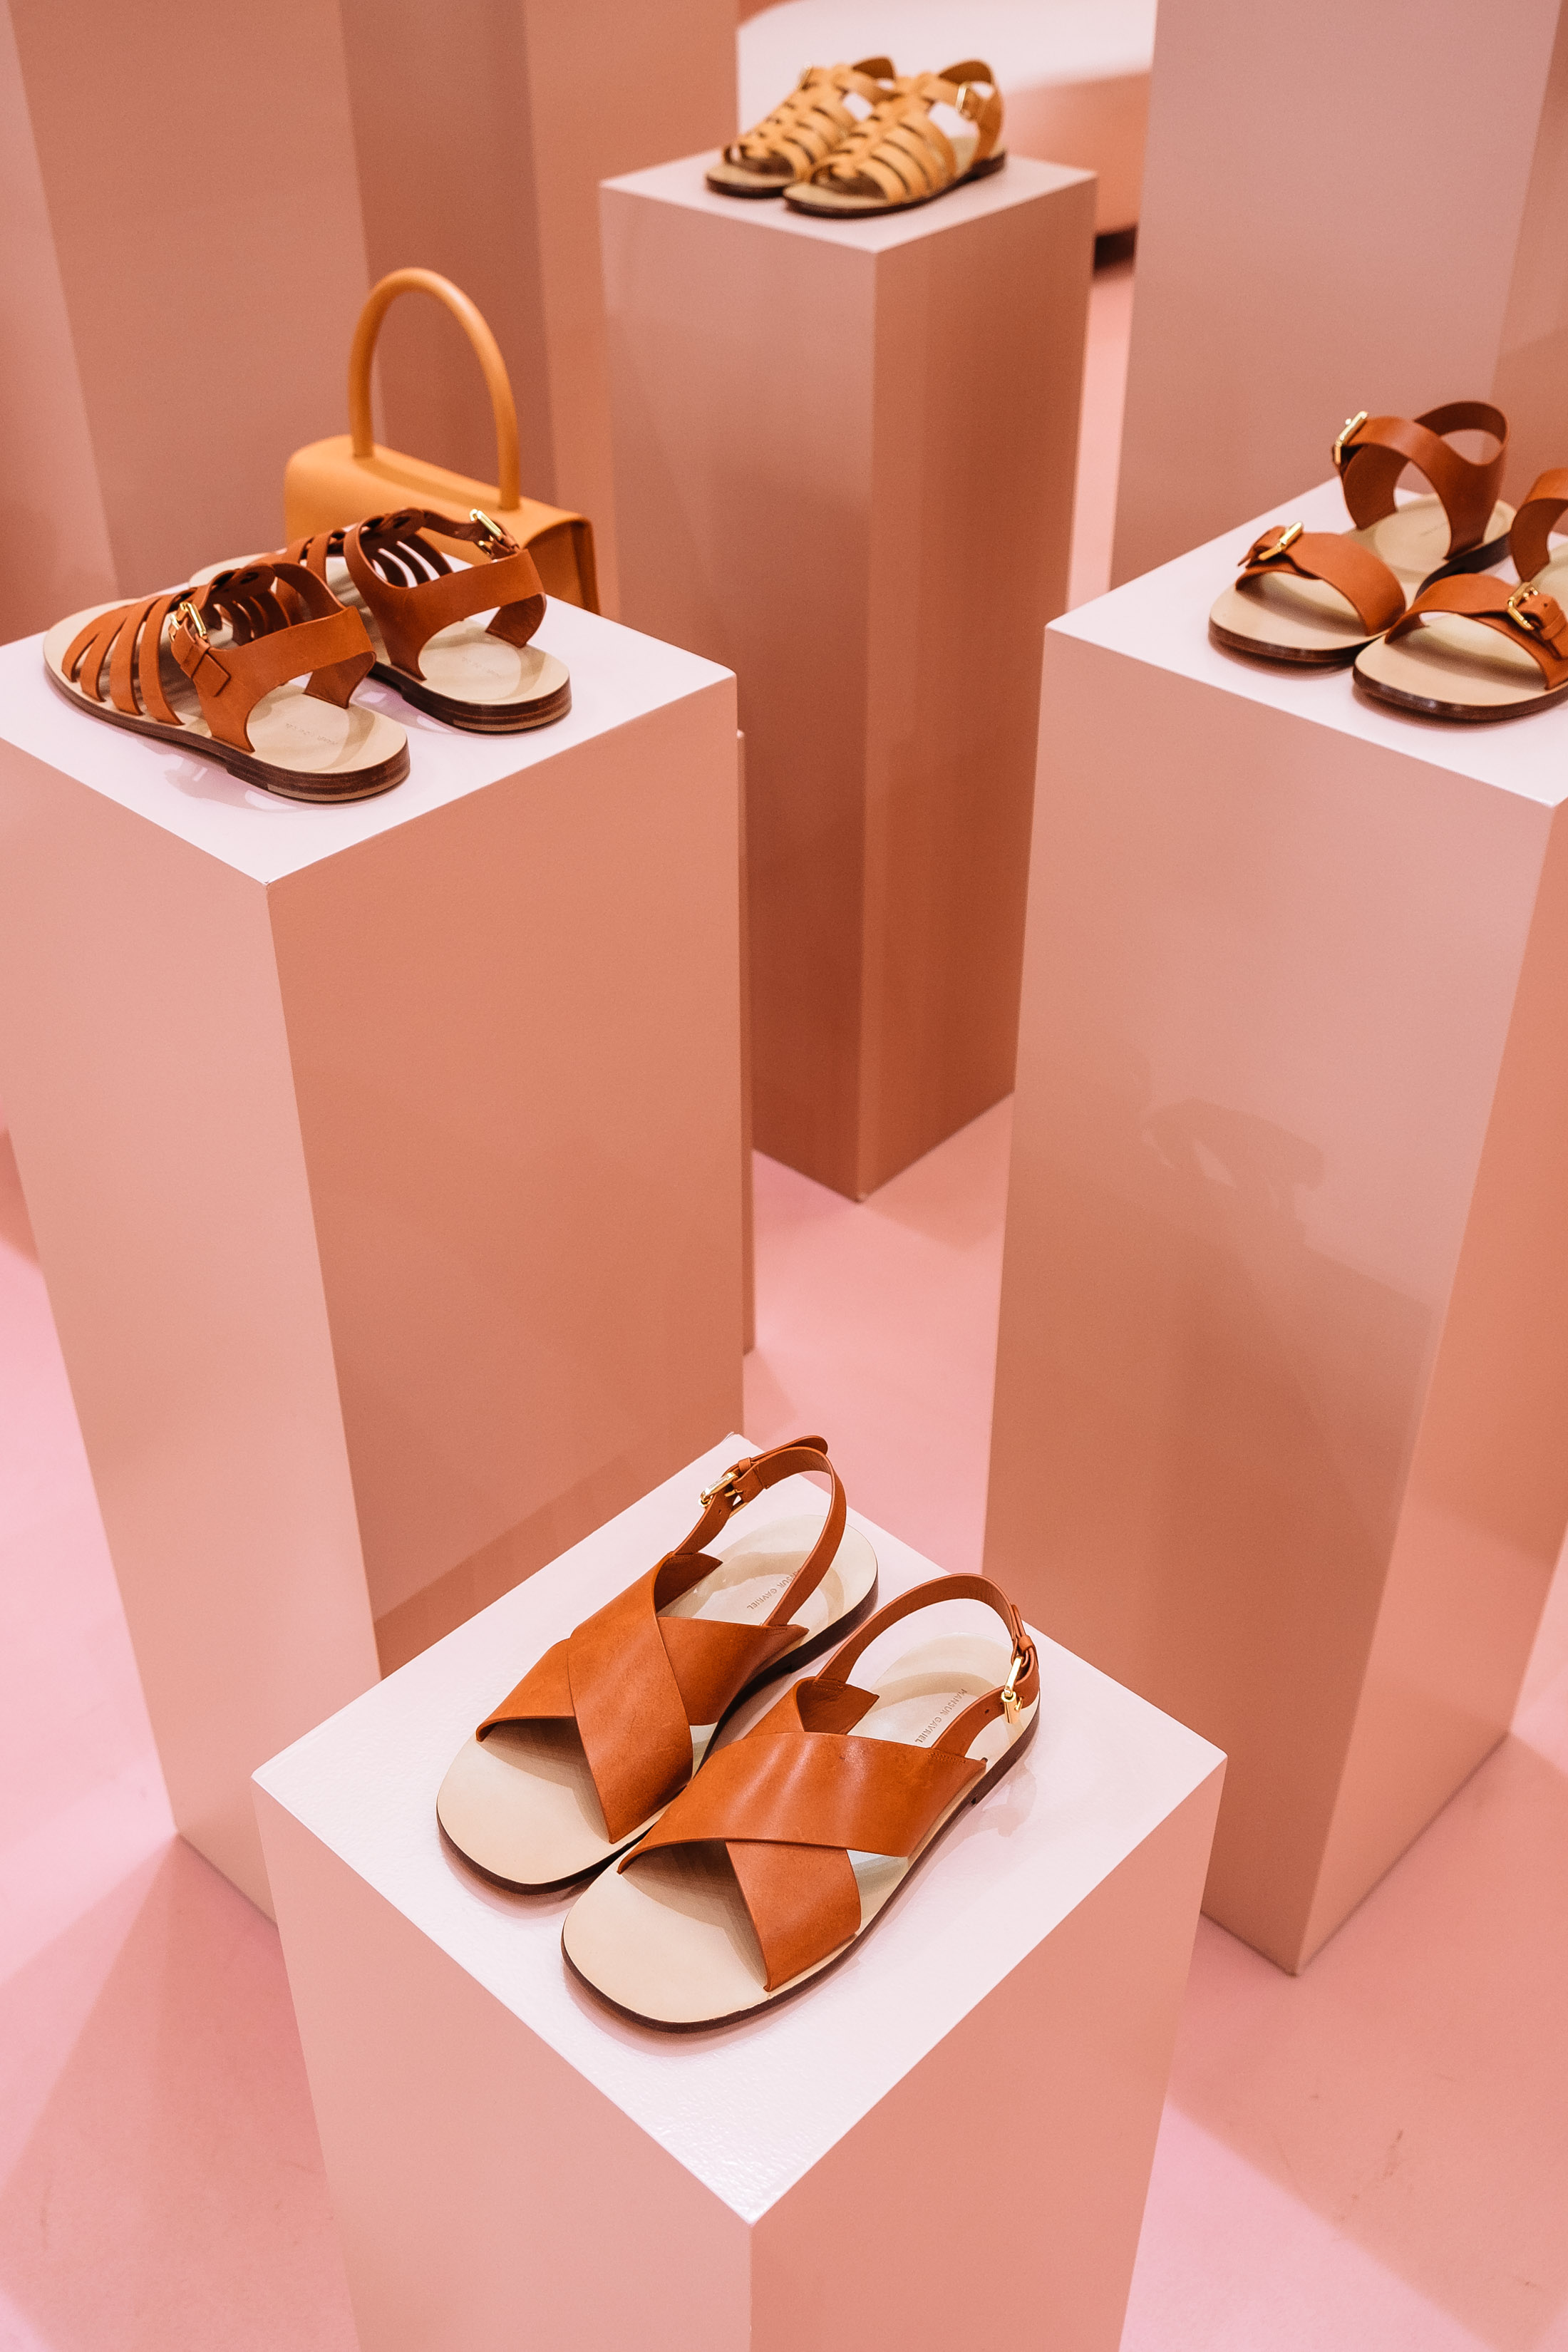 Mansur Gavriel shoes on display at their pink Soho store